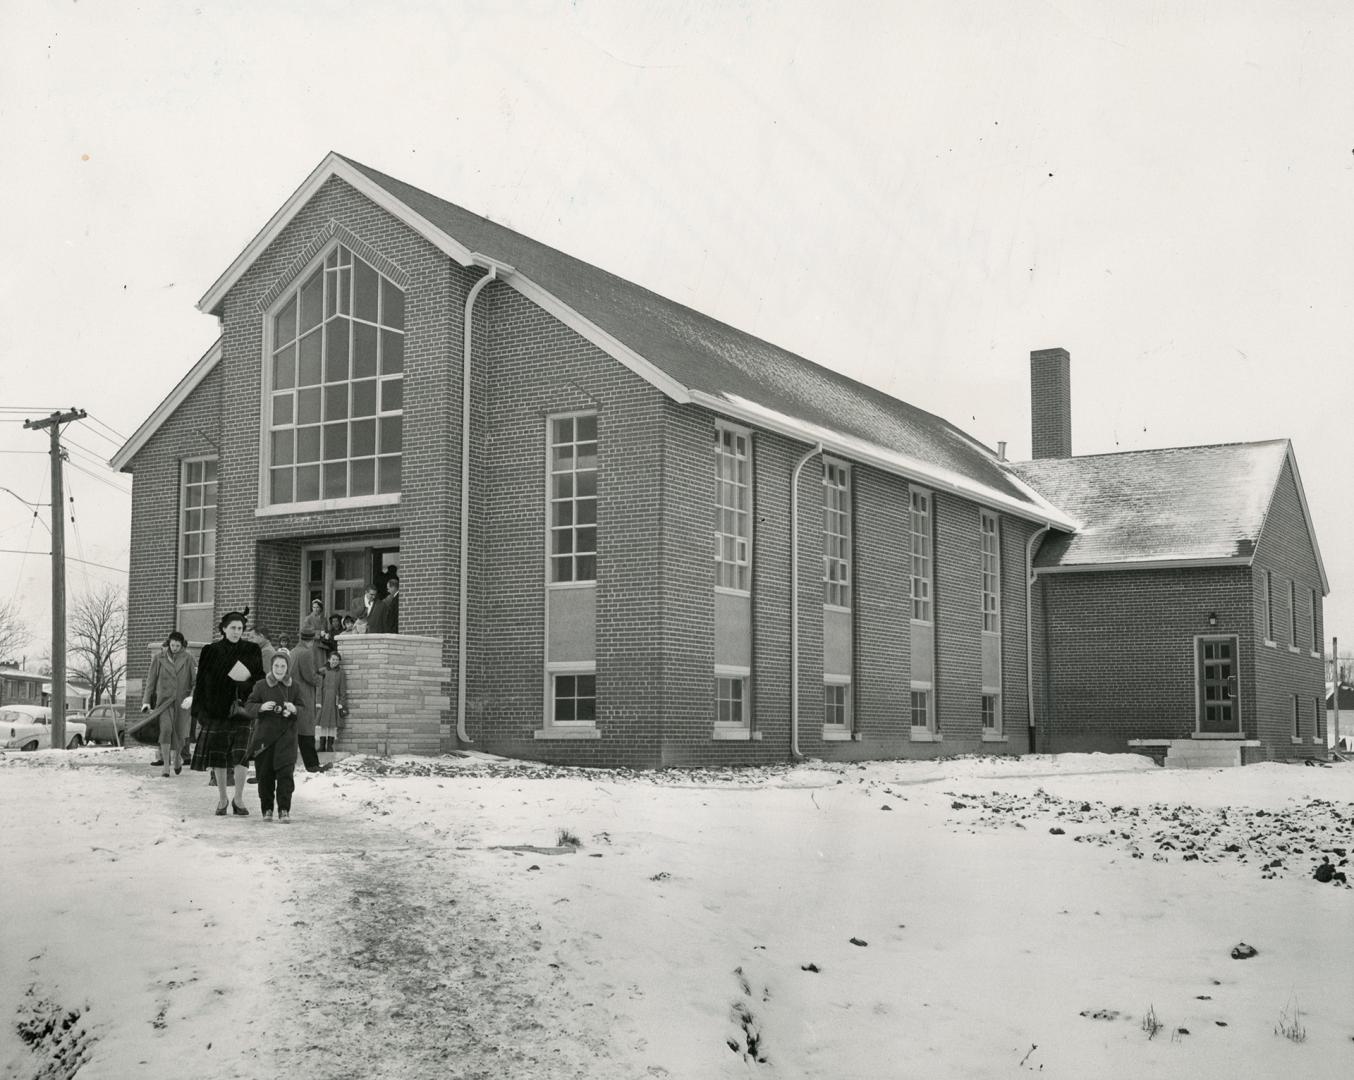 Small crowd seen exiting gable-roofed church with lattice window above entrance.